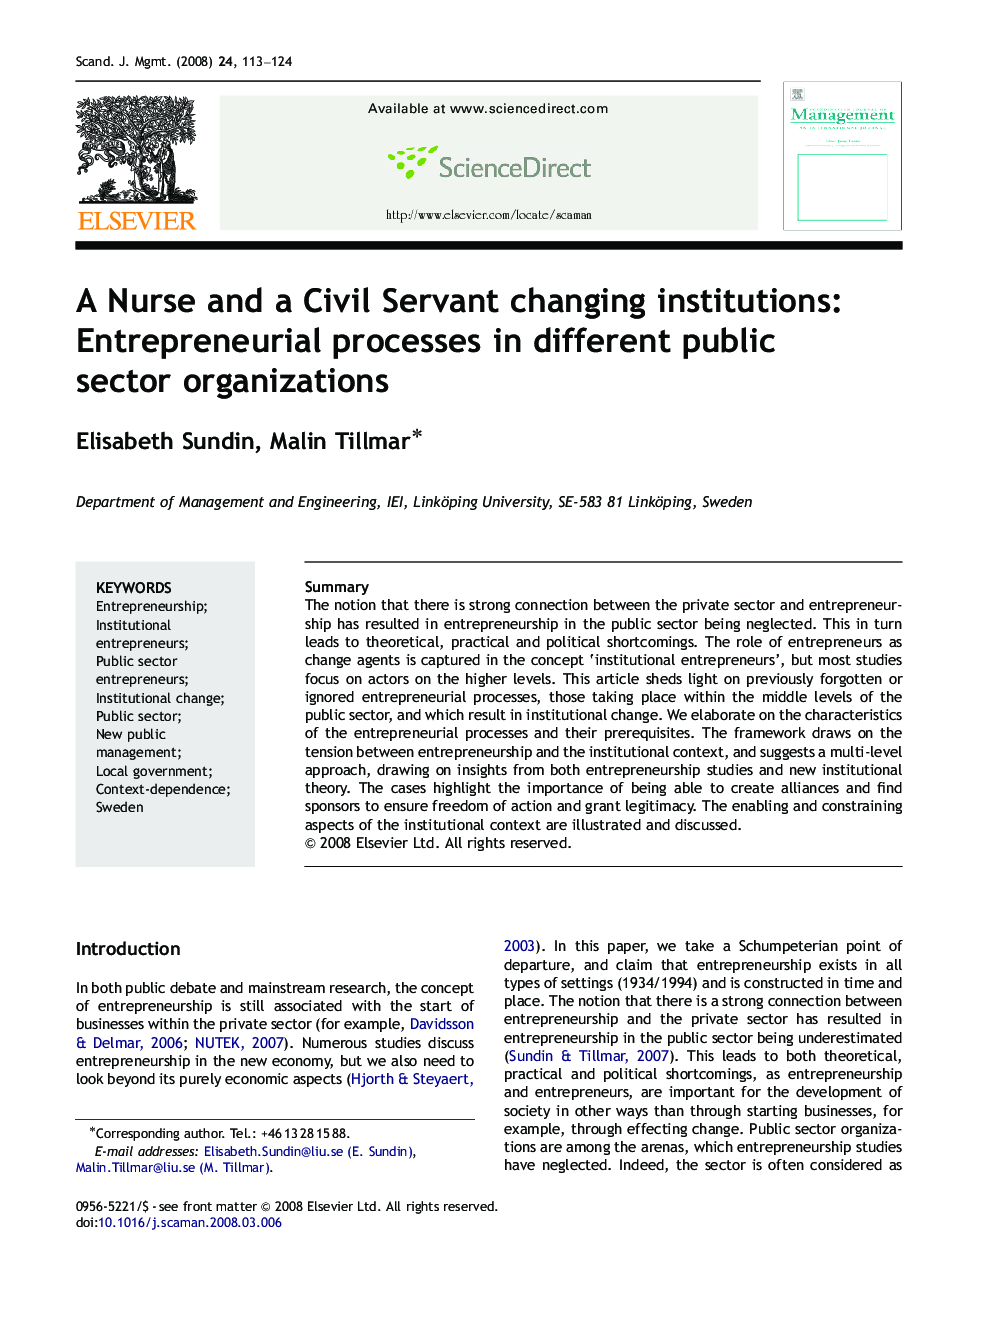 A Nurse and a Civil Servant changing institutions: Entrepreneurial processes in different public sector organizations